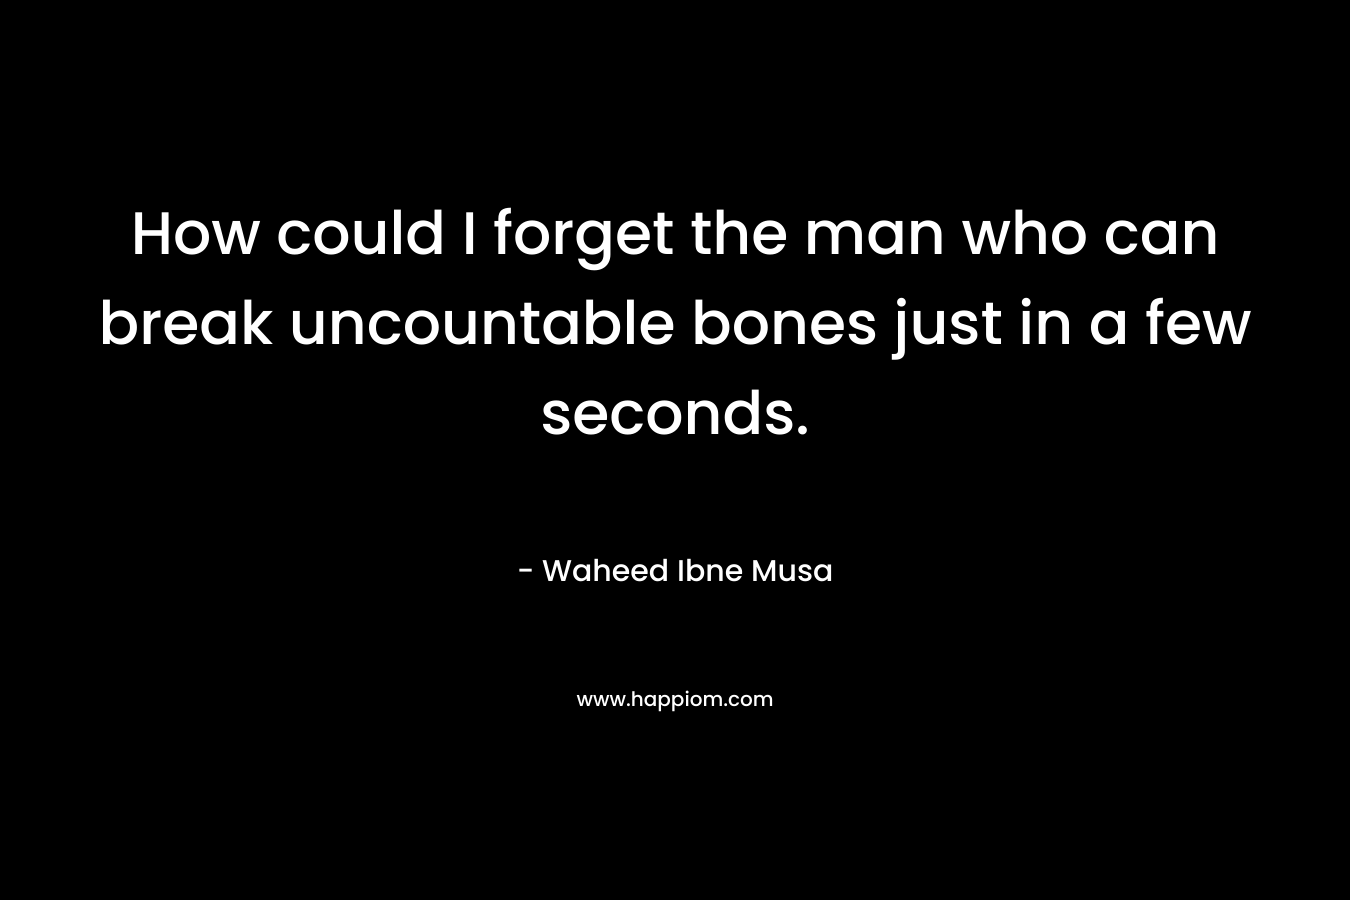 How could I forget the man who can break uncountable bones just in a few seconds. – Waheed Ibne Musa